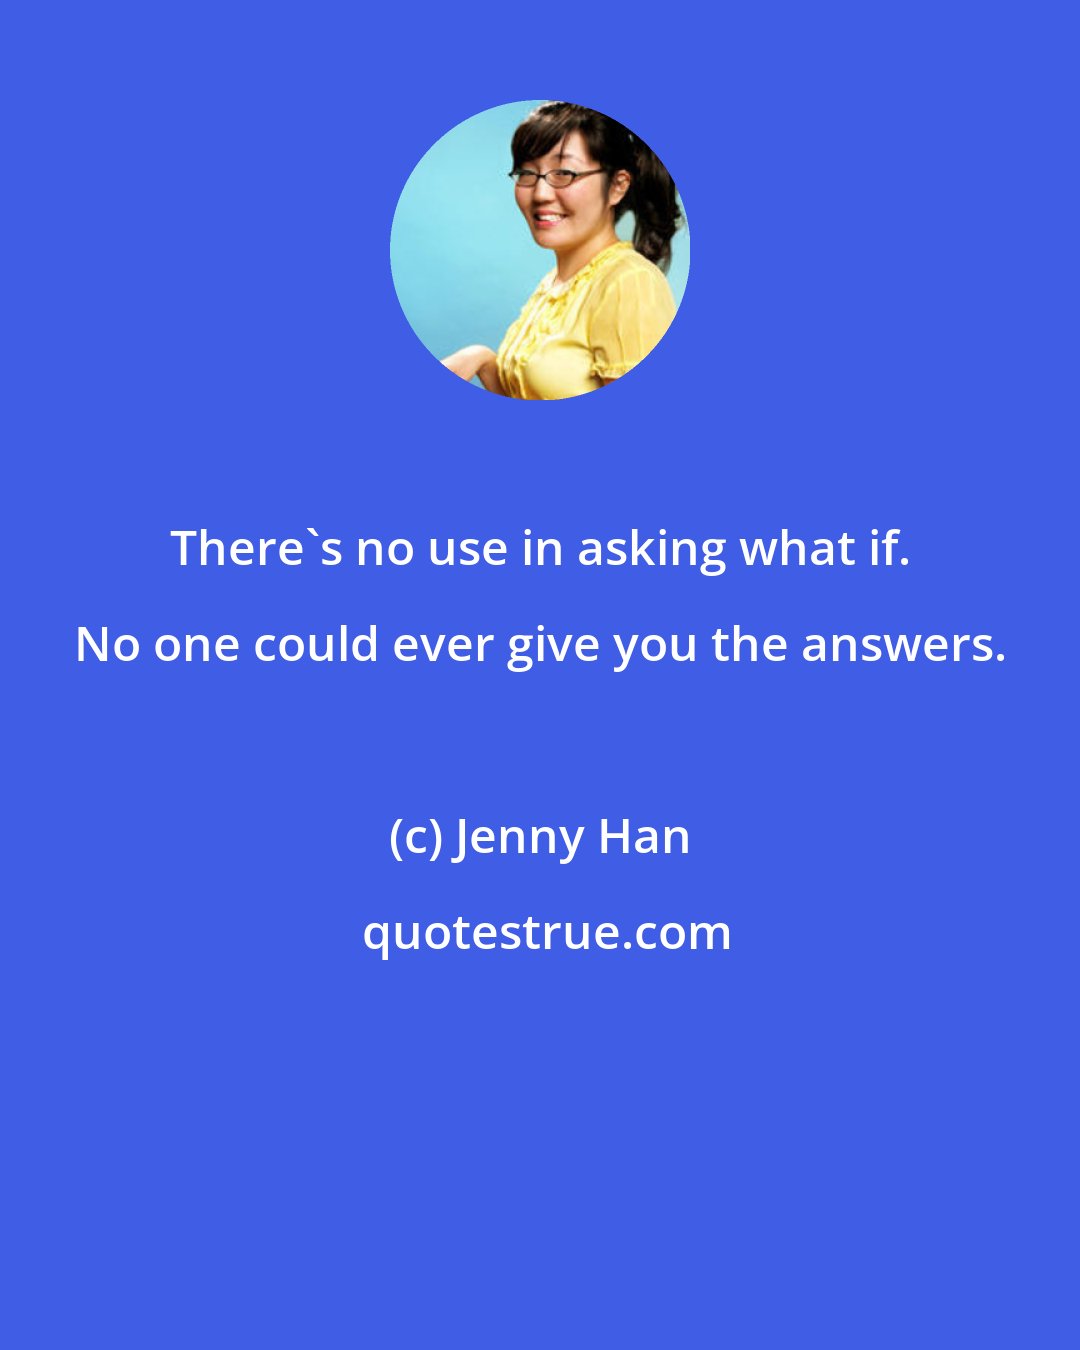 Jenny Han: There's no use in asking what if. No one could ever give you the answers.